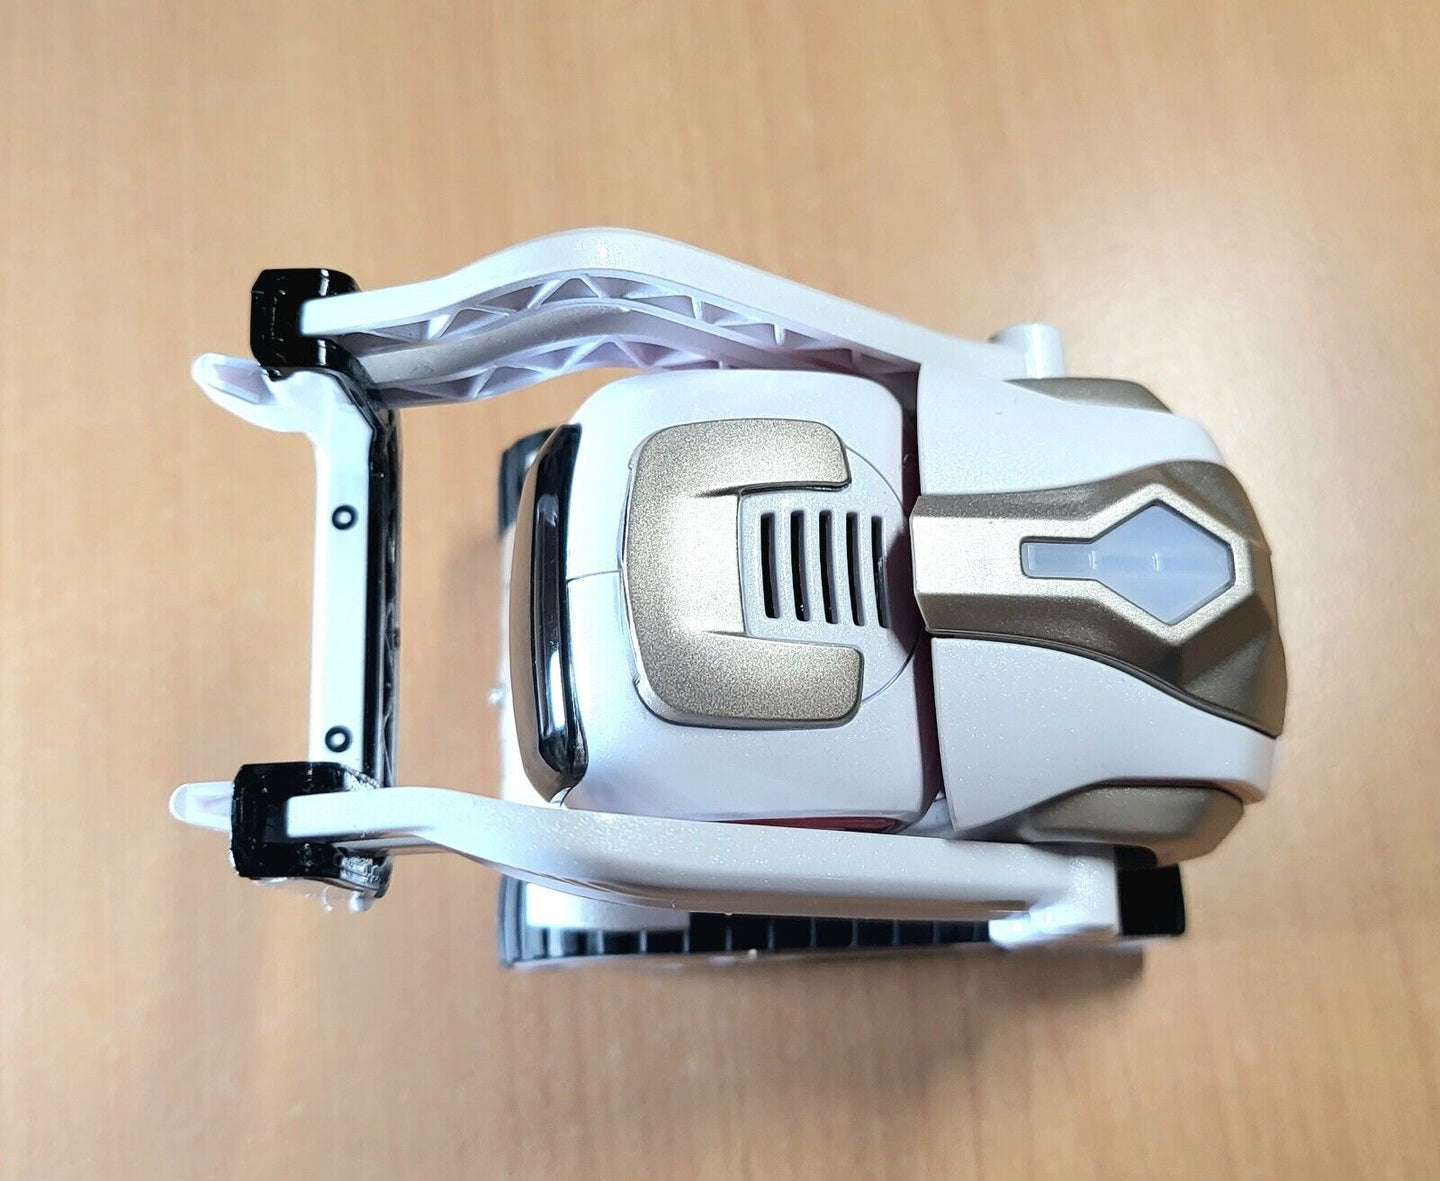 Anki Cozmo Robot (Robot Only) Perfect working Condition Condition Grade - B - Chys Thijarah